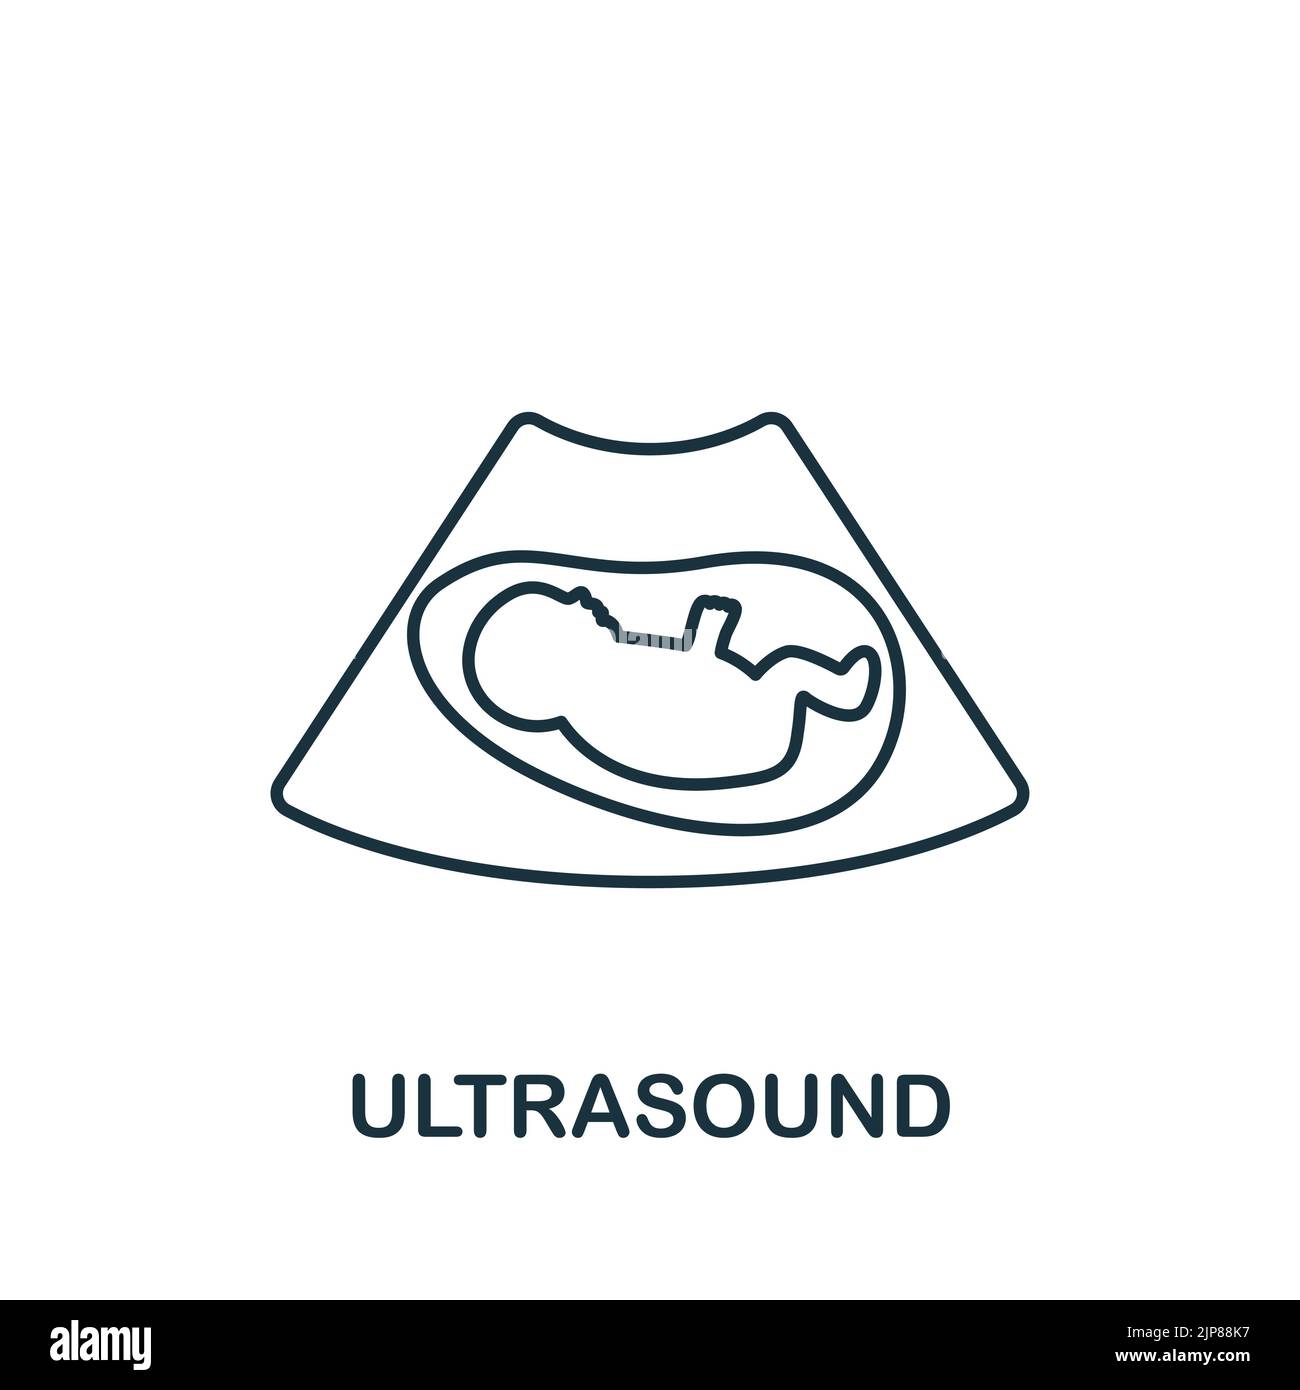 Ultrasound icon. Line simple Health Check icon for templates, web design and infographics Stock Vector